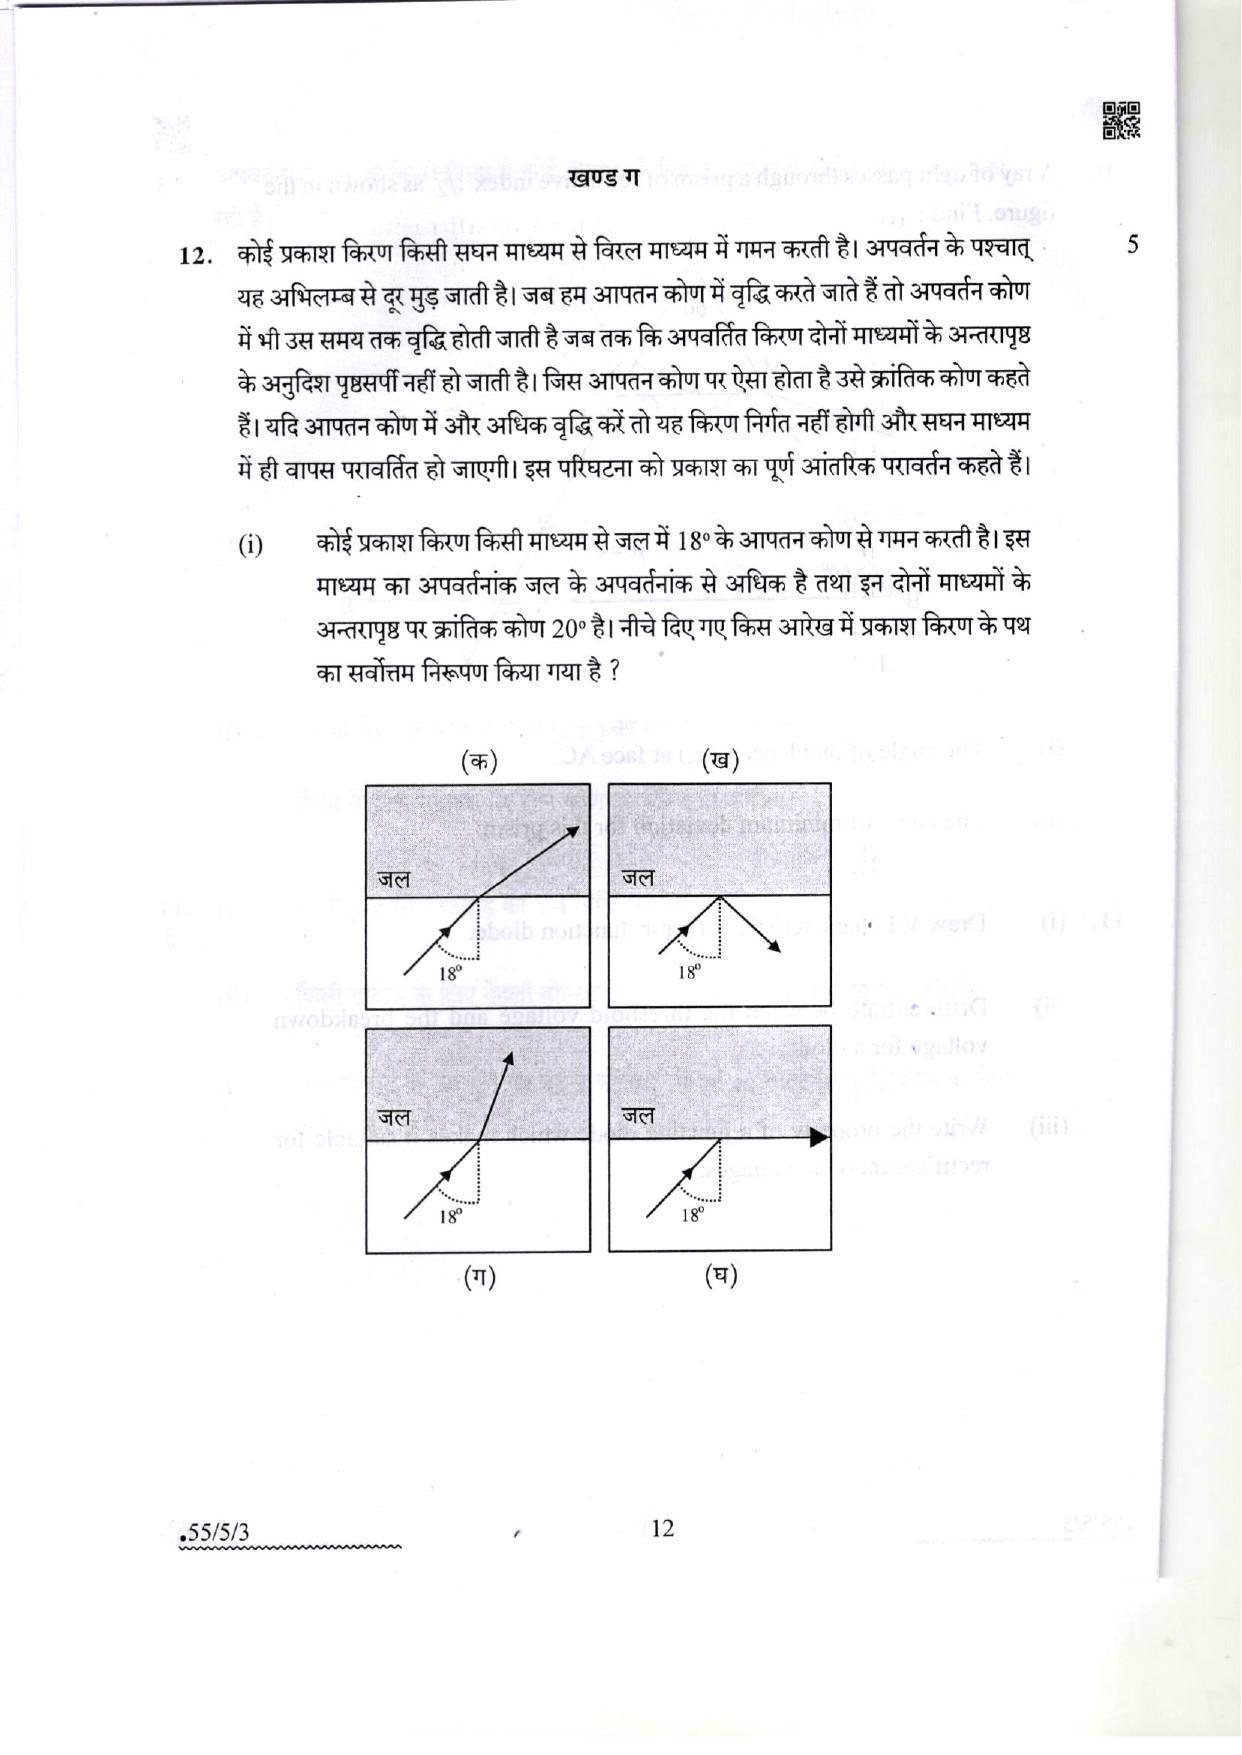 CBSE Class 12 55-5-3 Physics 2022 Question Paper - Page 12